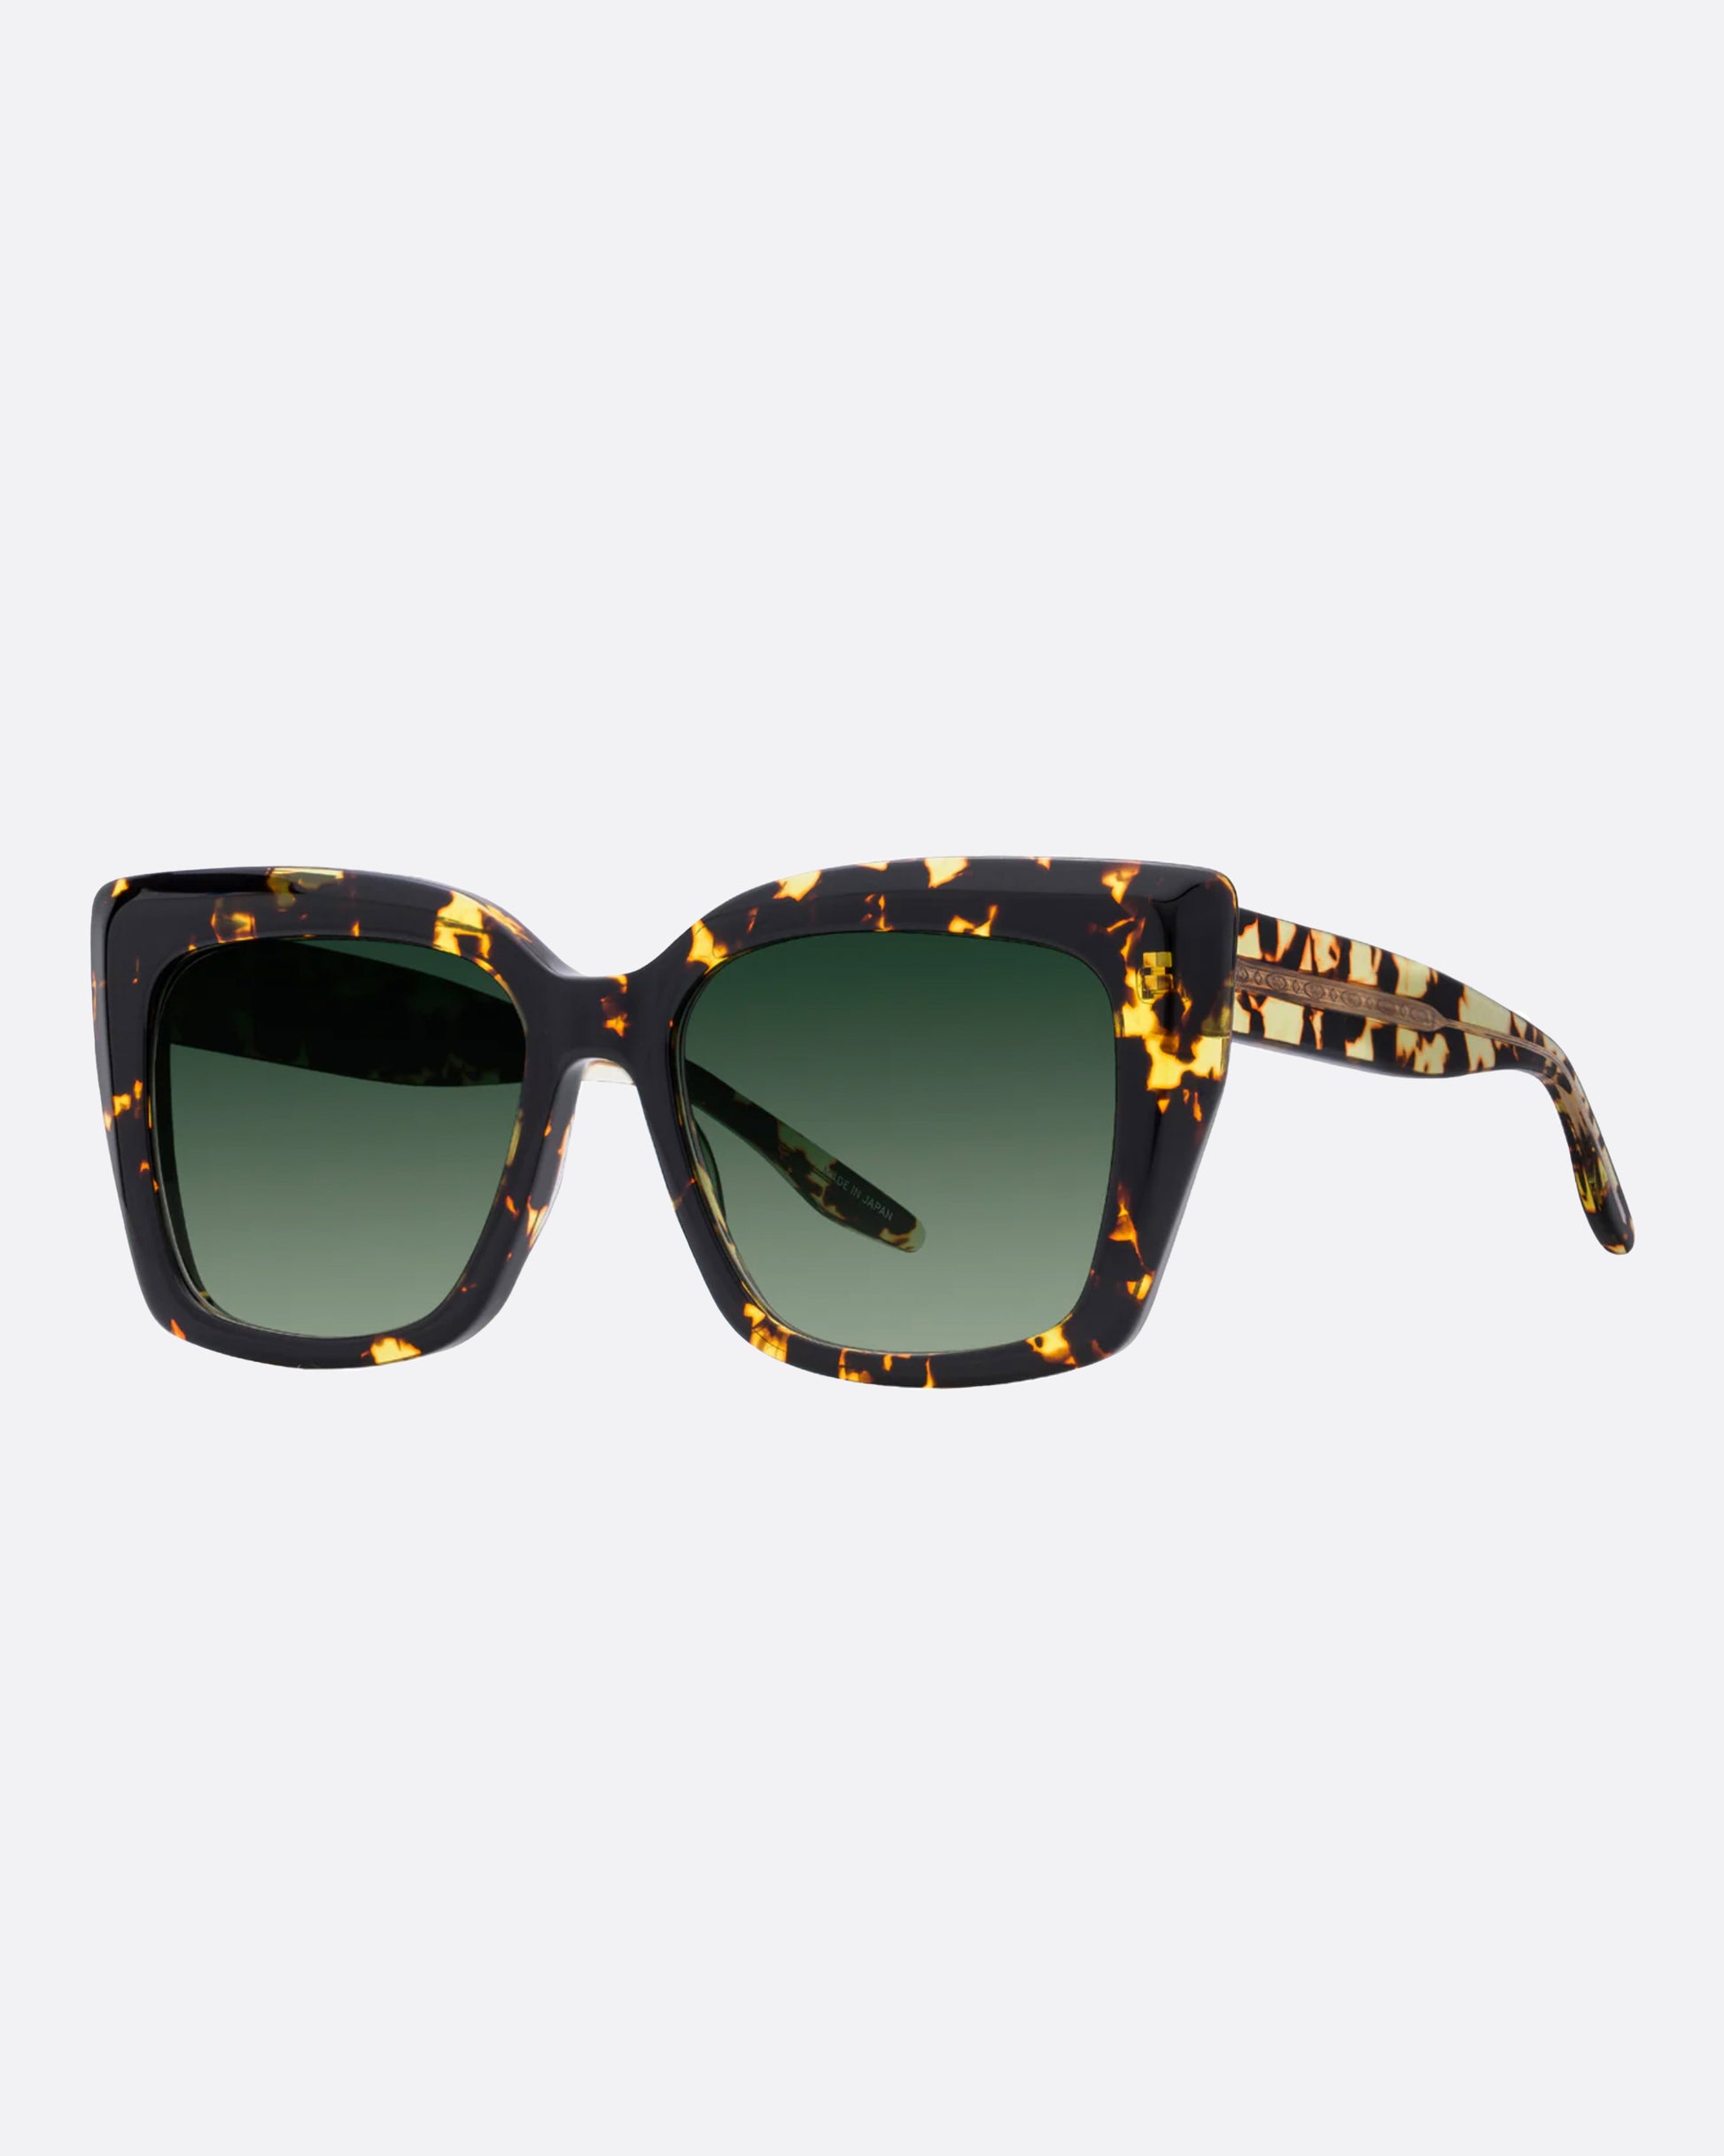 A bold, beveled acetate frame with a 24k gold plated titanium core in the most perfect tortoise with green gradient lenses.